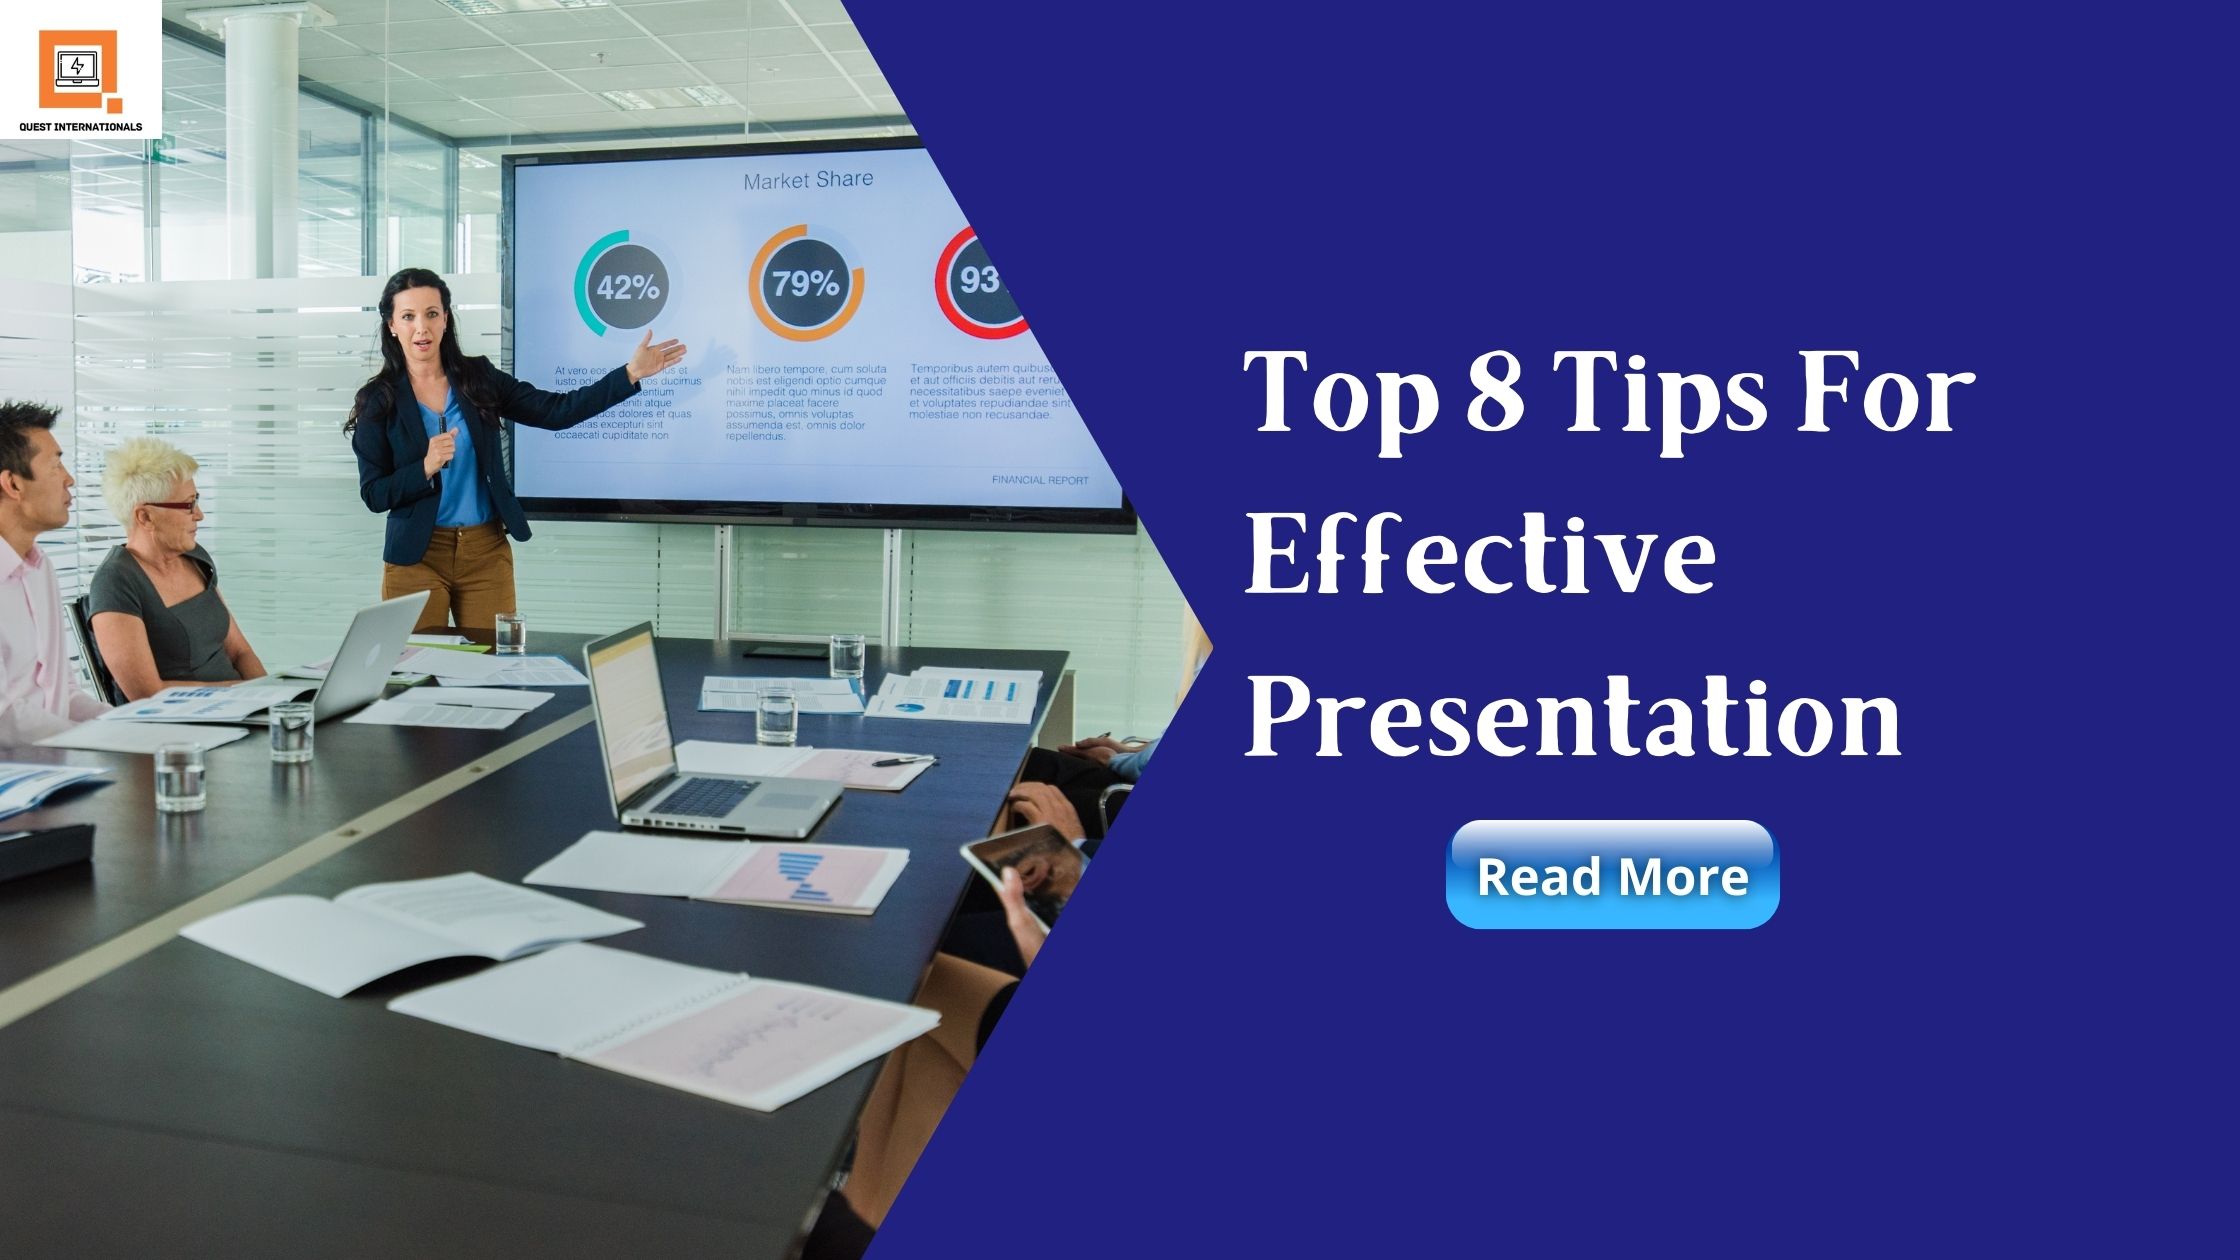 You are currently viewing Top 8 Tips For Effective Presentation